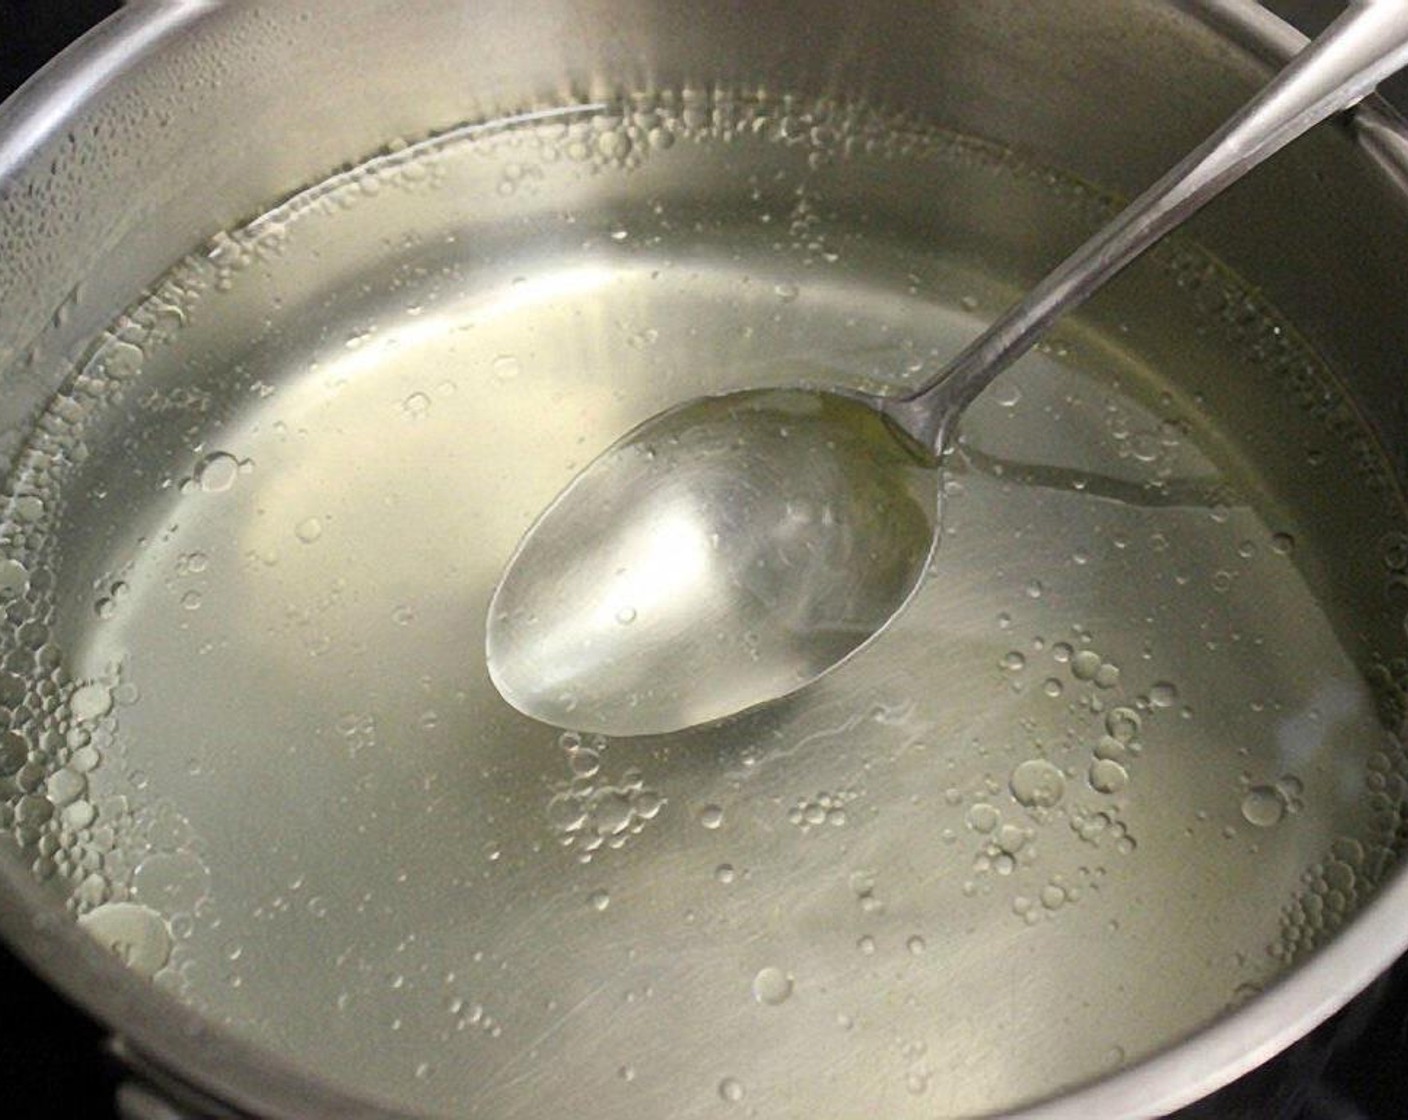 step 5 In a medium saucepan, combine Water (4 1/2 cups), White Granulated Sugar (1 cup), Distilled White Vinegar (1 cup), Salt (2 1/2 Tbsp), Olive Oil (1/2 cup), and bring to a boil.